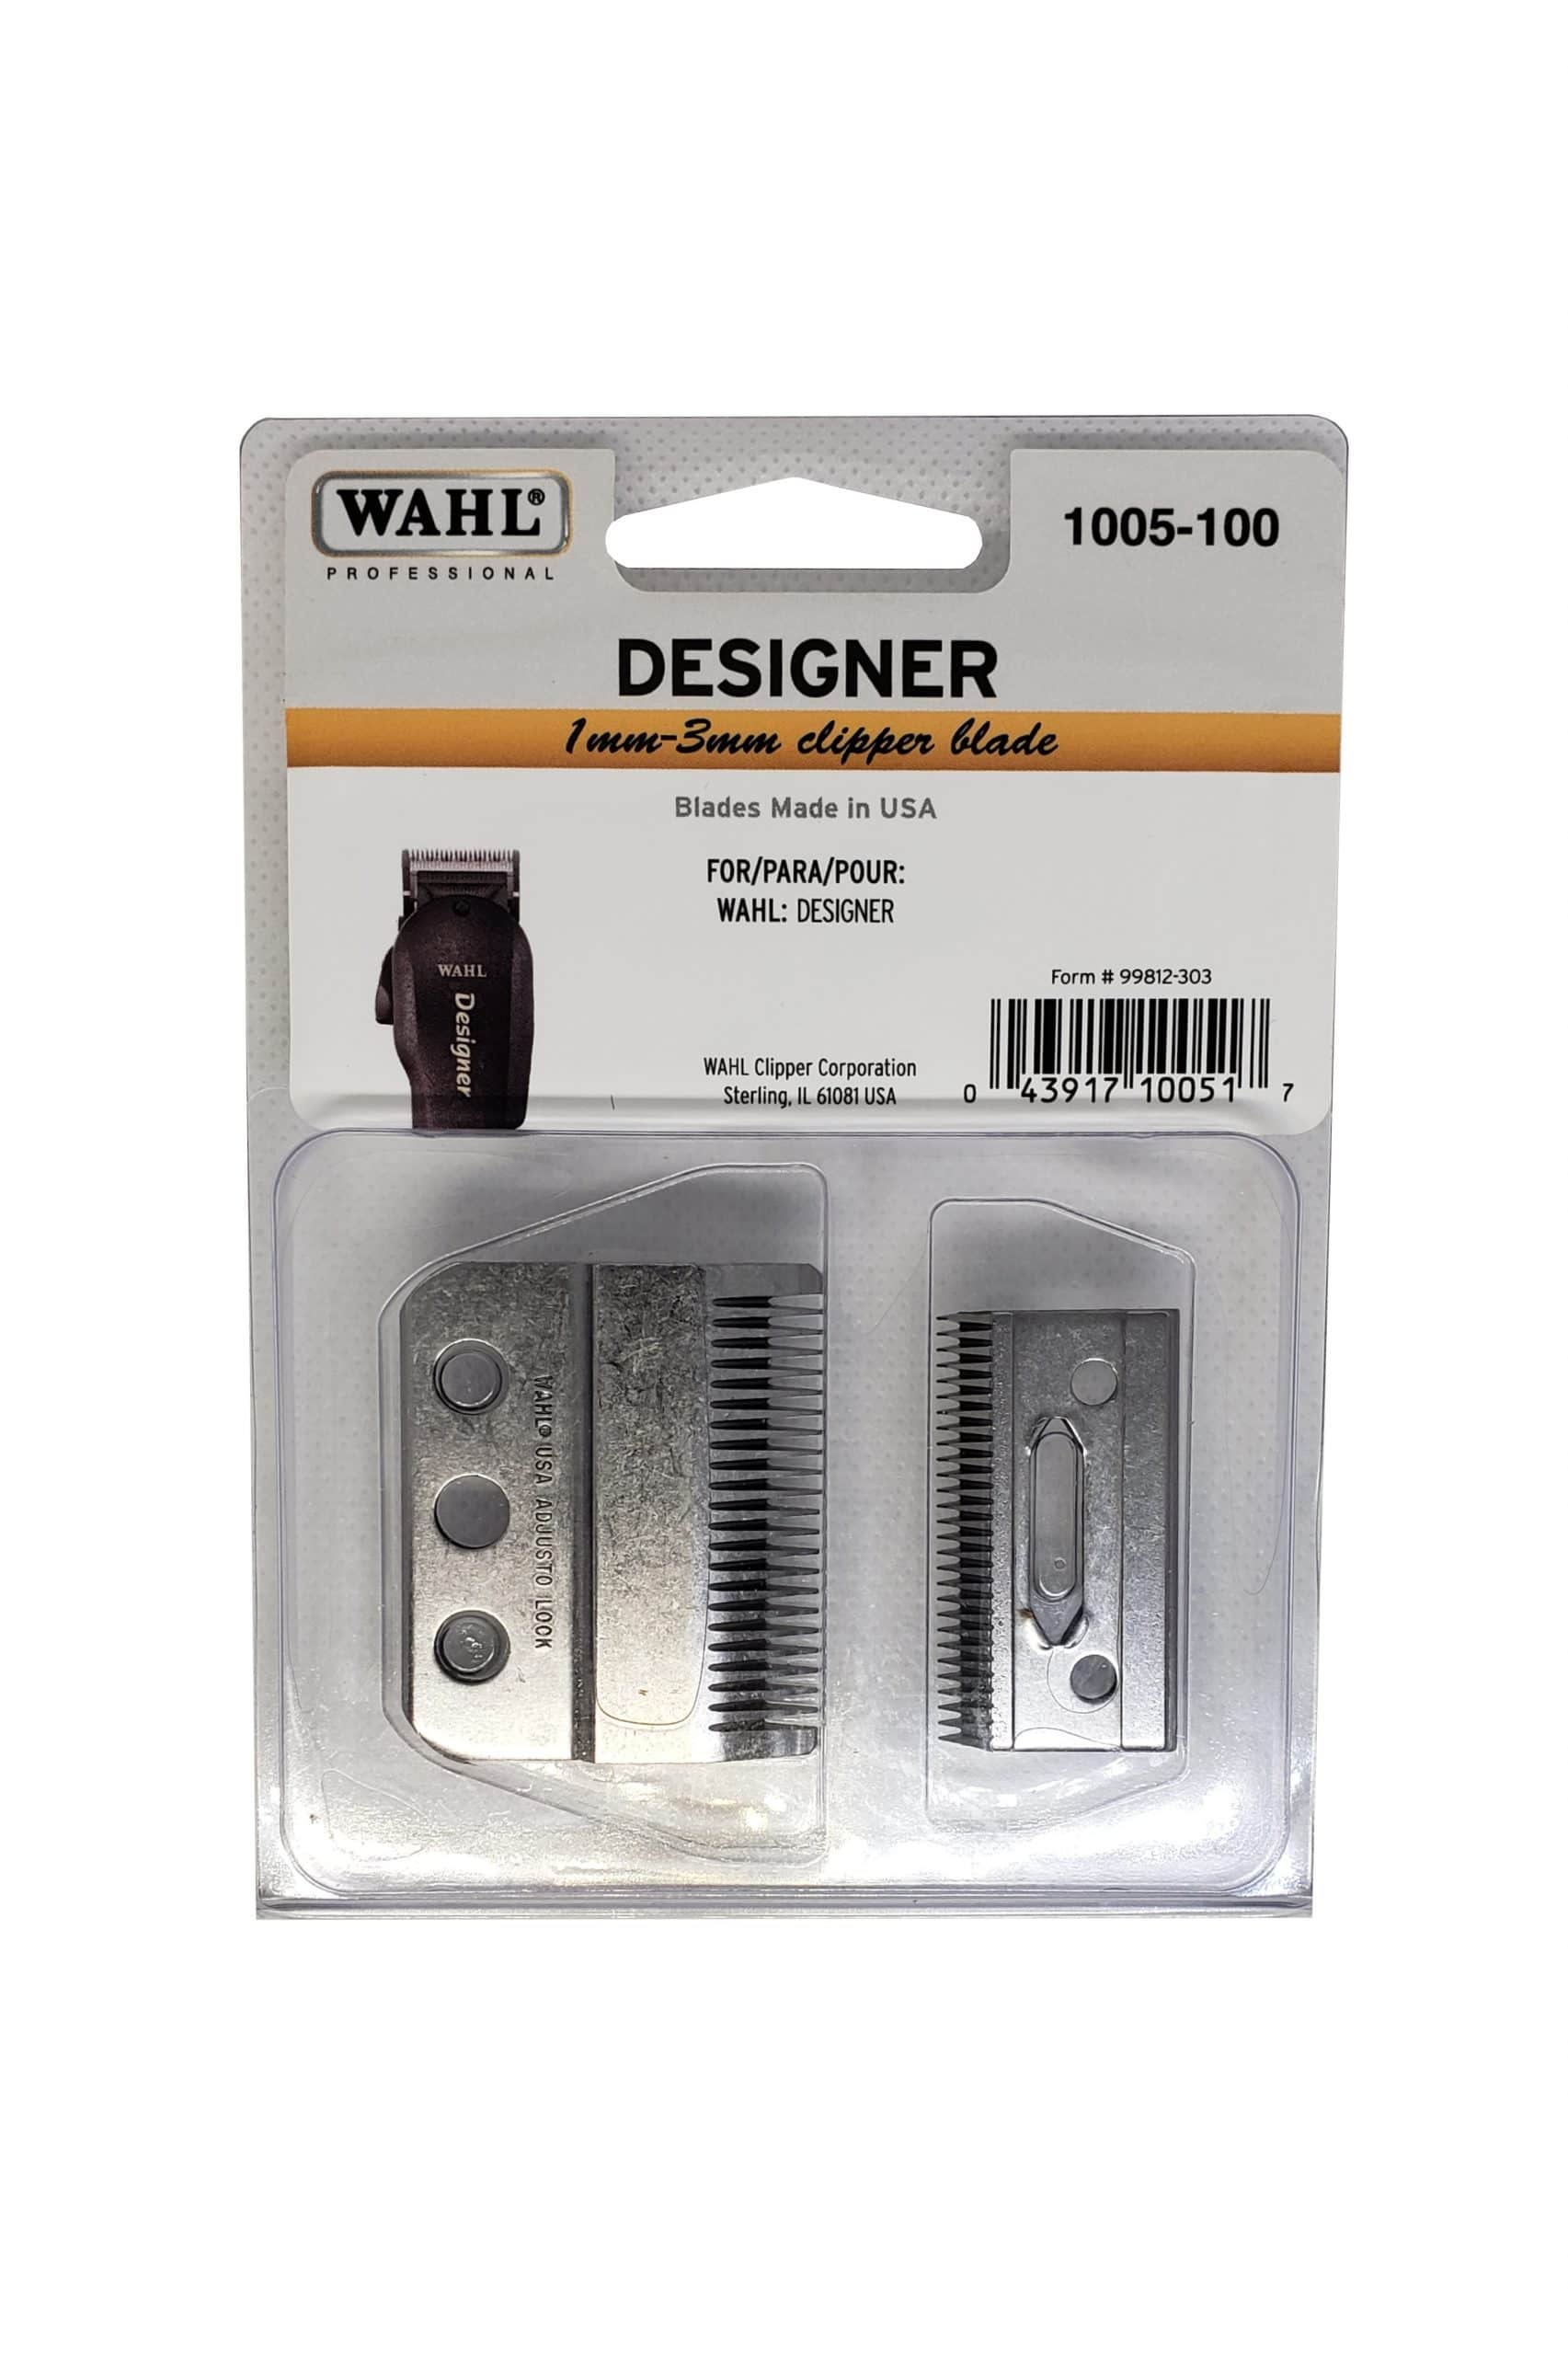 changing wahl clipper blades